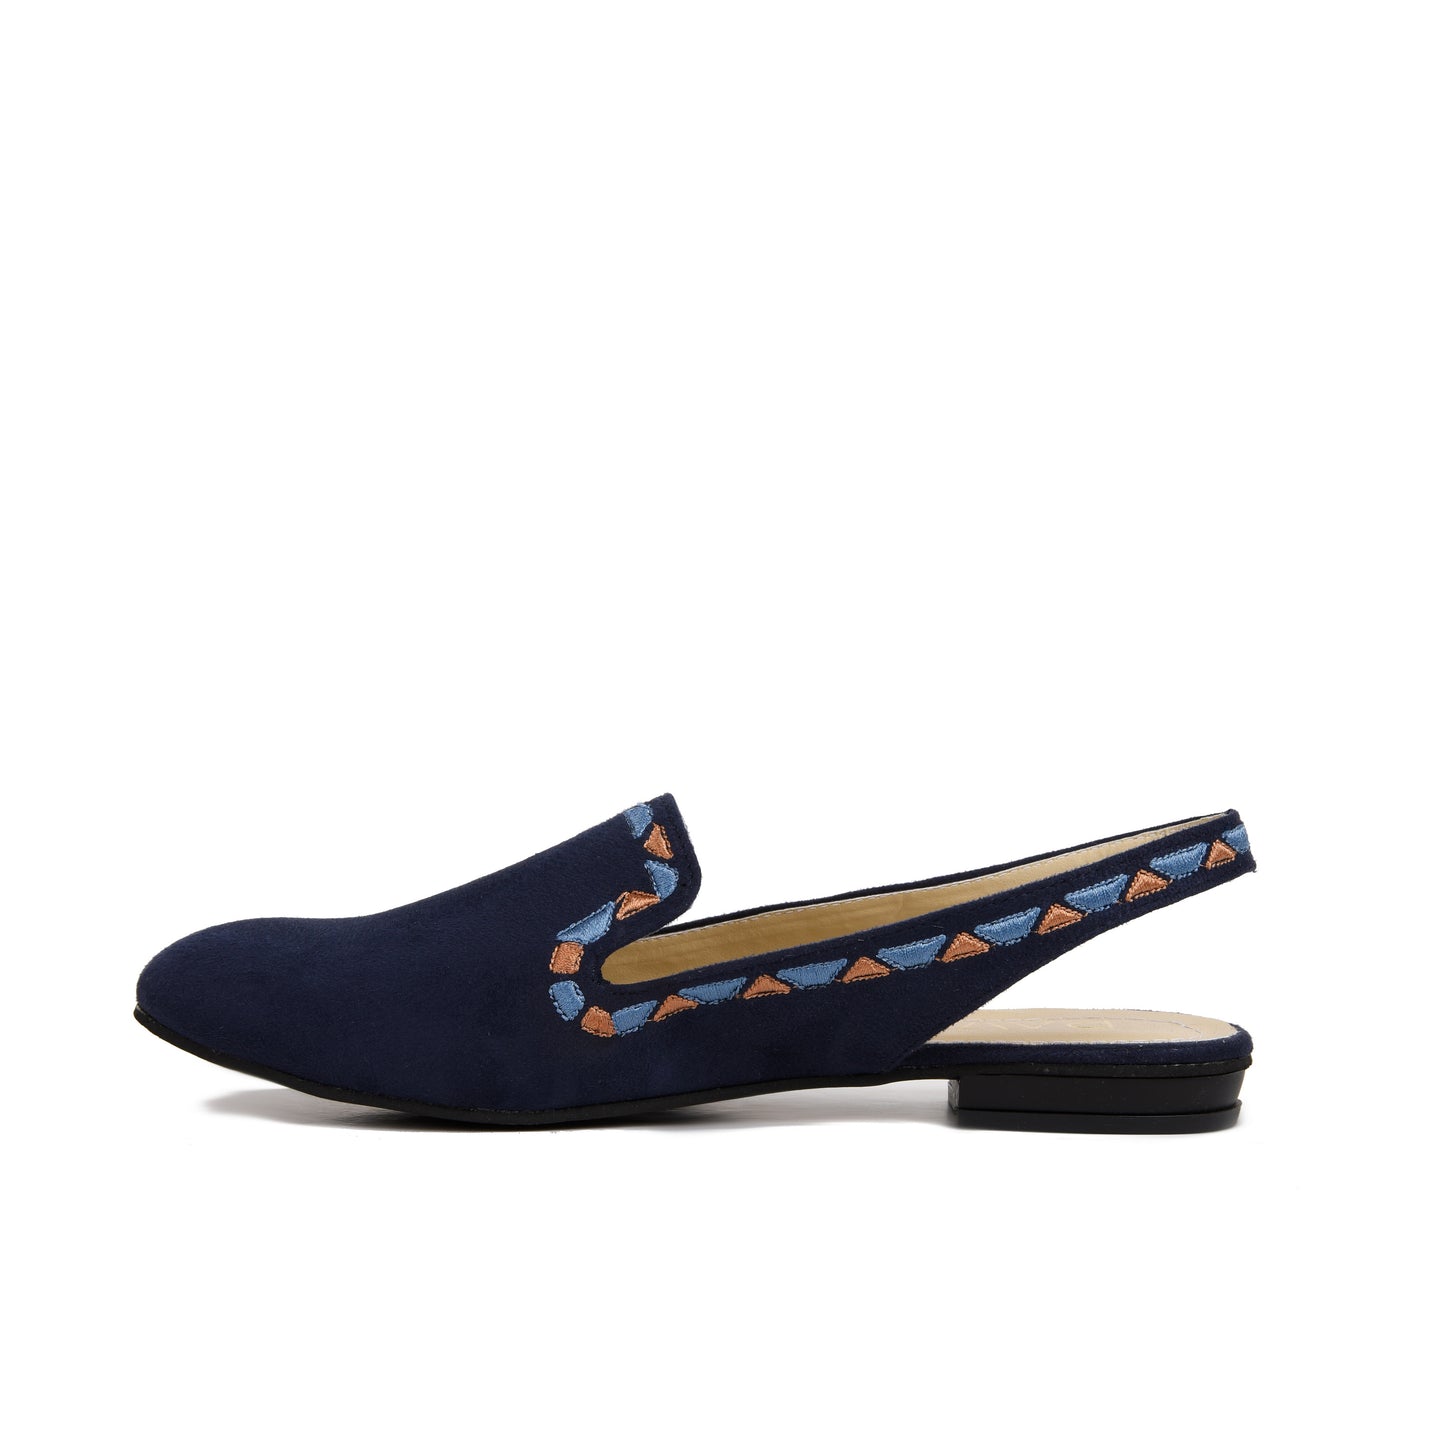 Sira Navy shoes with Colourful embroideries border-6001